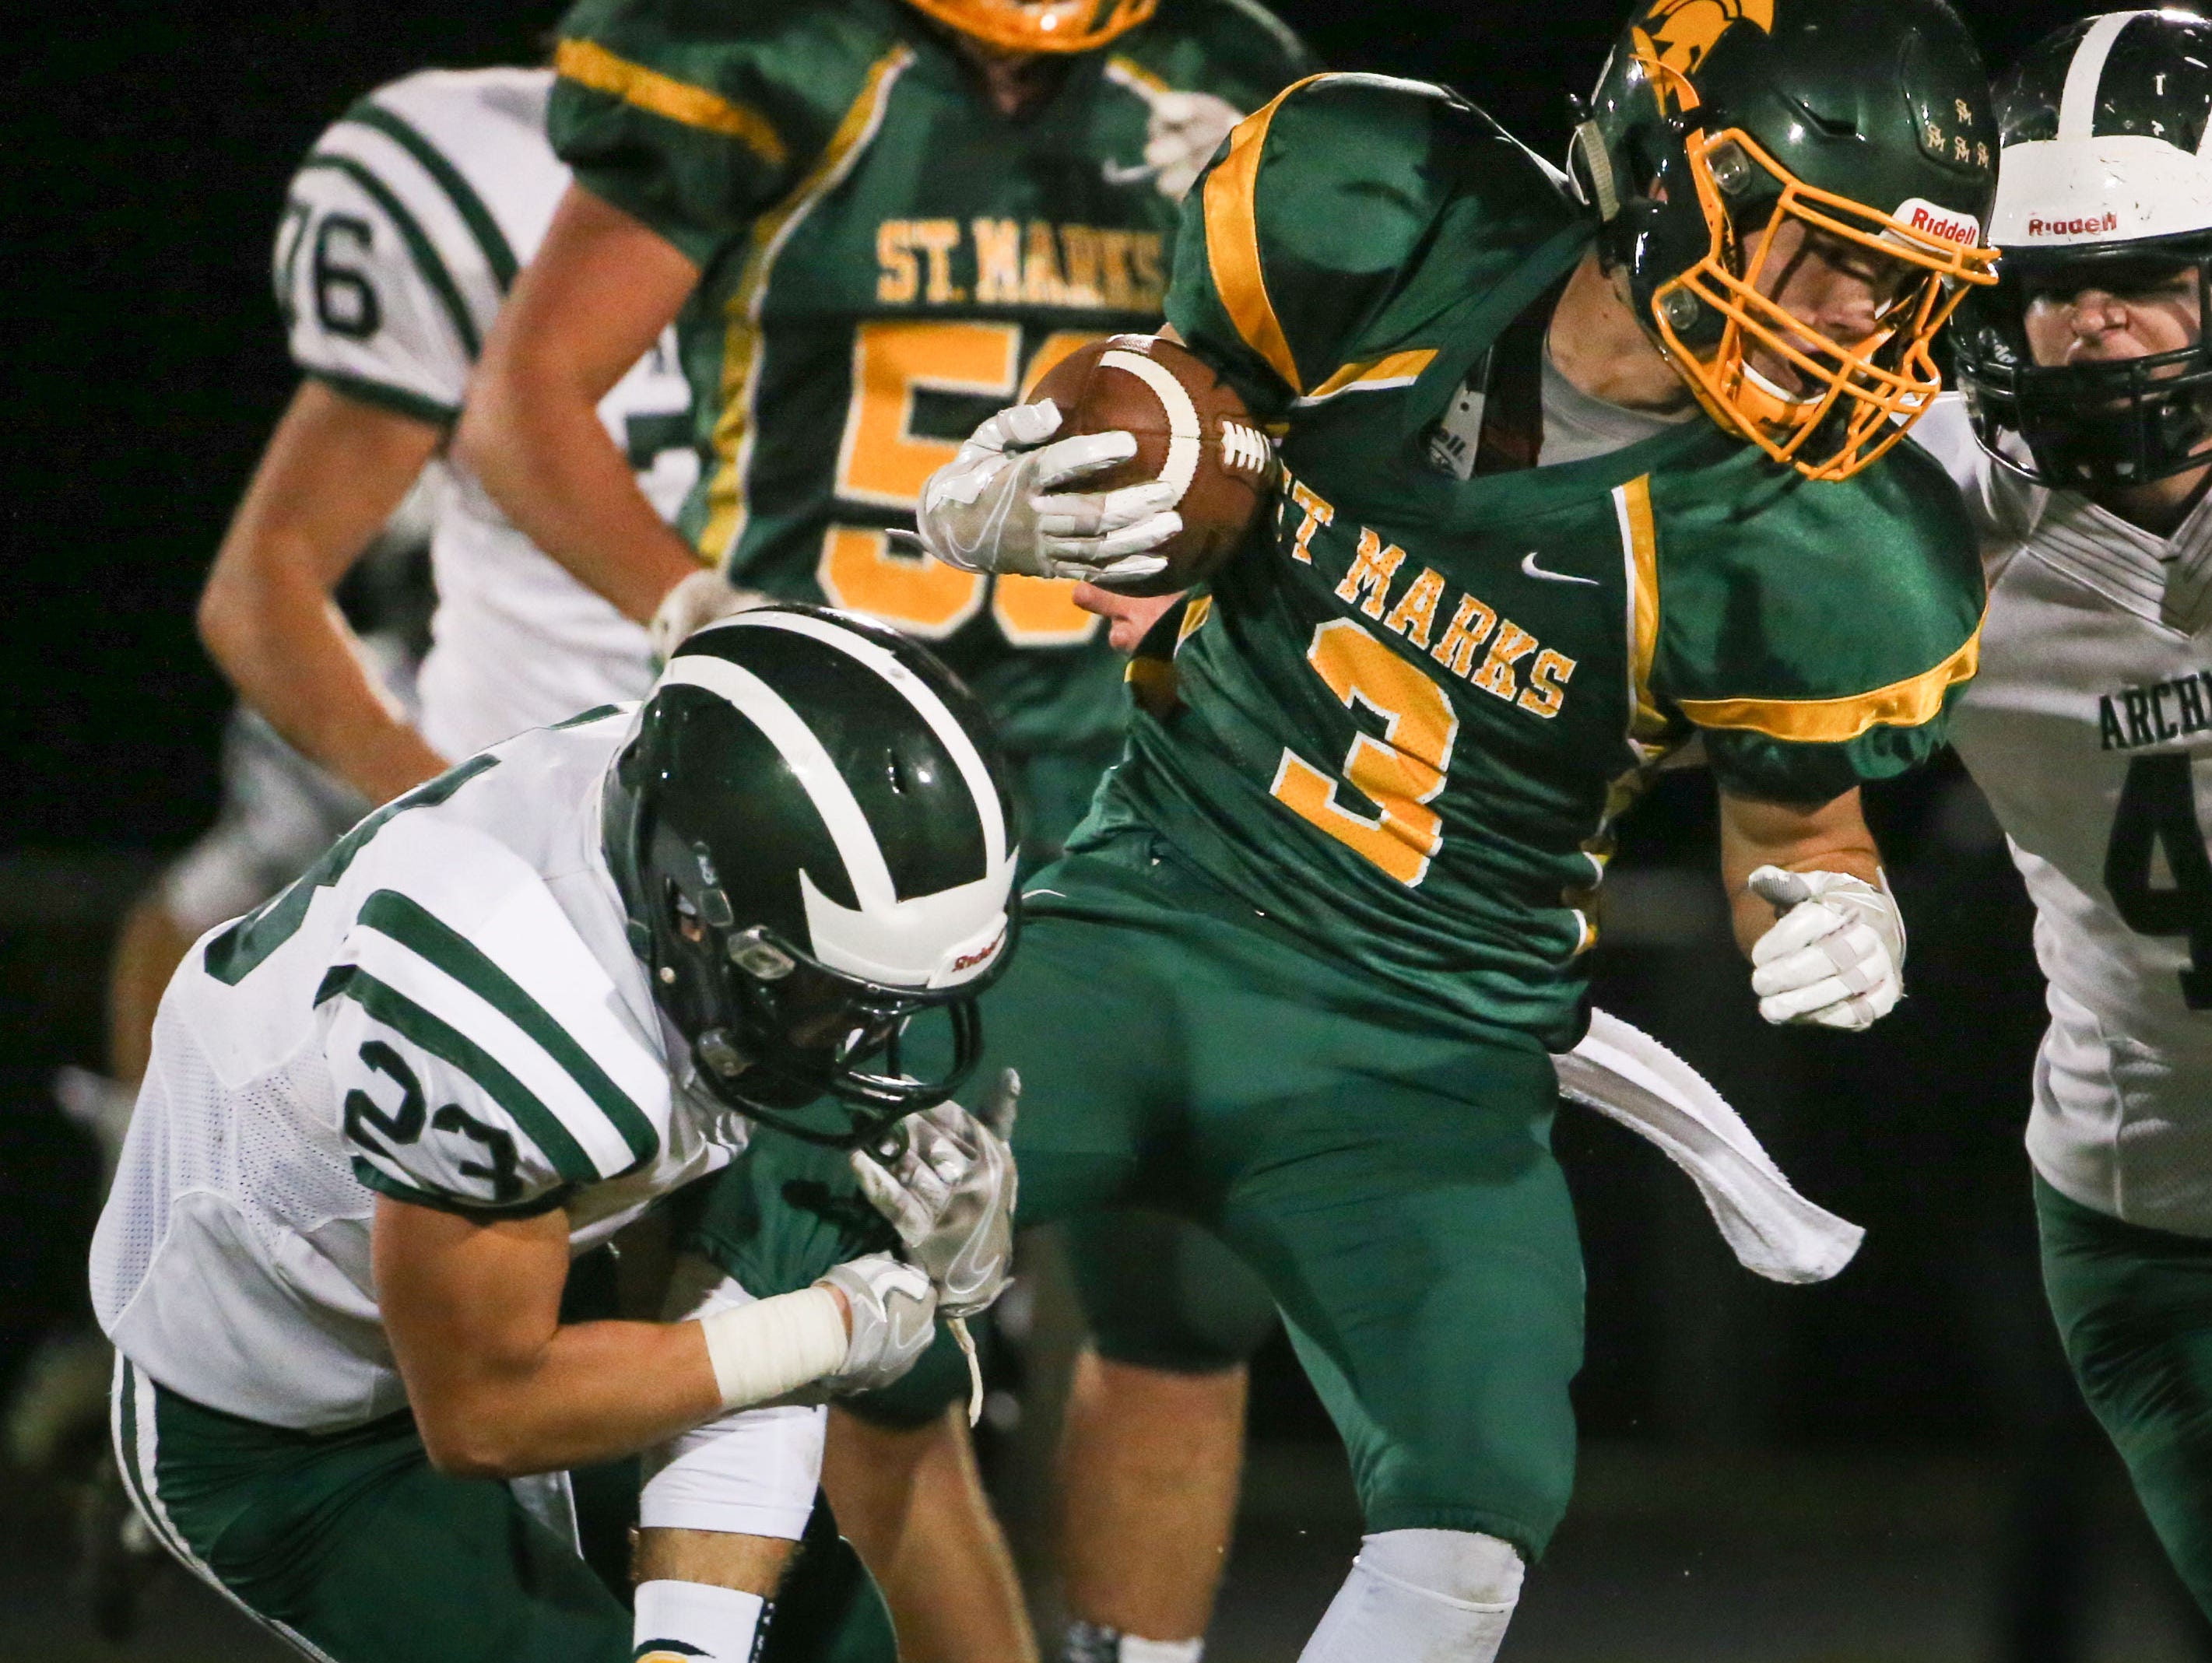 St. Mark's running back Maxwell Palmer is tied up by Archmere defensive back Patrick McVey in the second quarter of their game at St. Mark's Friday.